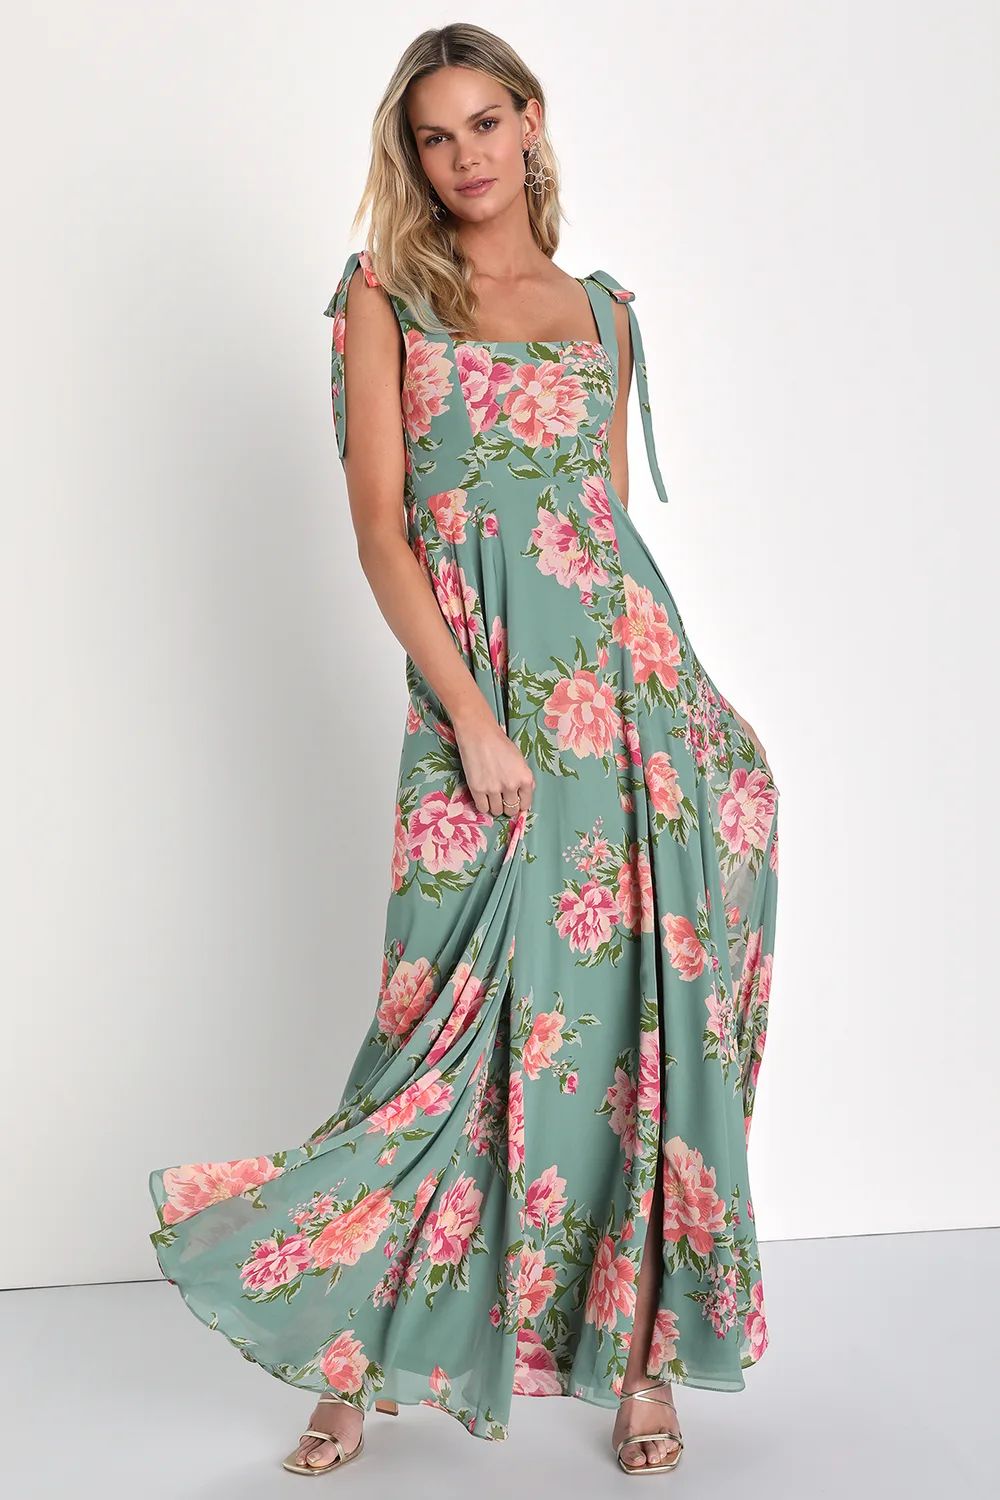 Passionate Forever Sage Green Floral Print Bow Strap Maxi Dress | Lulus